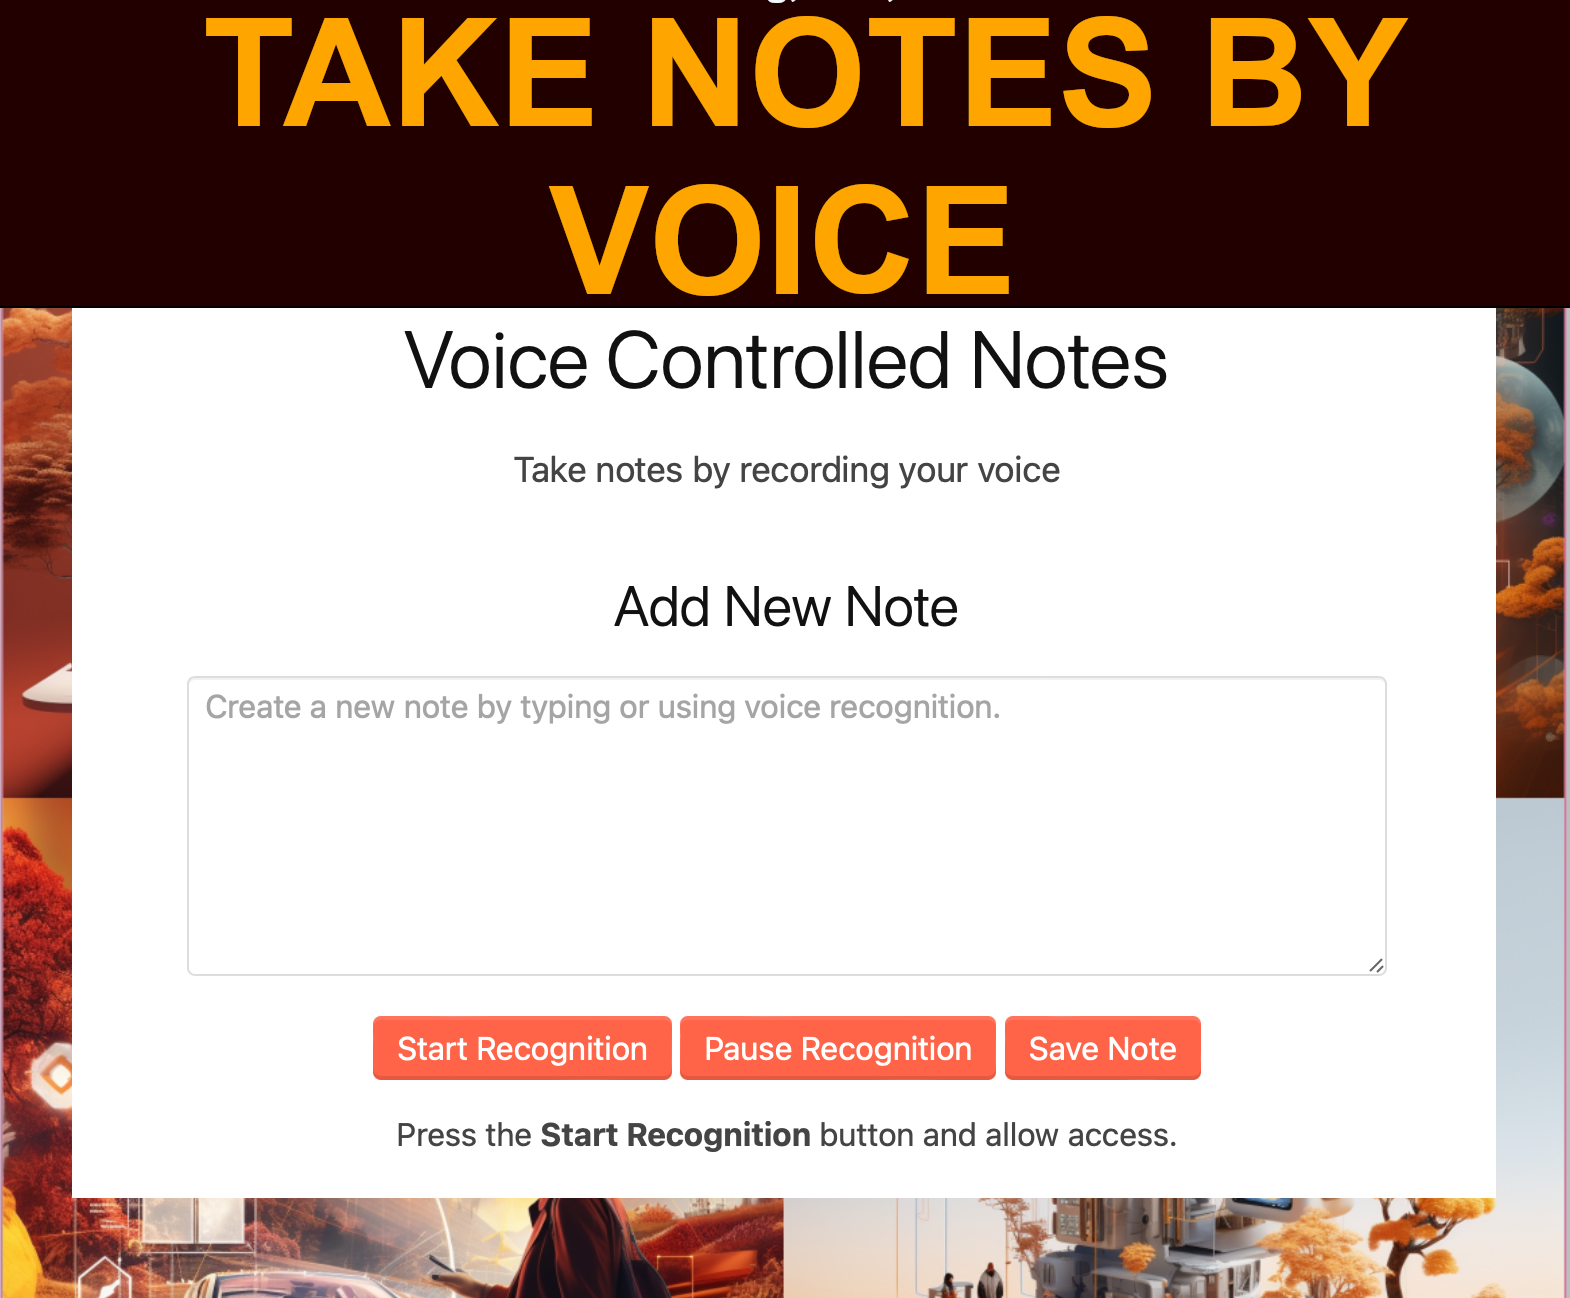 Take Notes by Voice - Voice controlled Notes